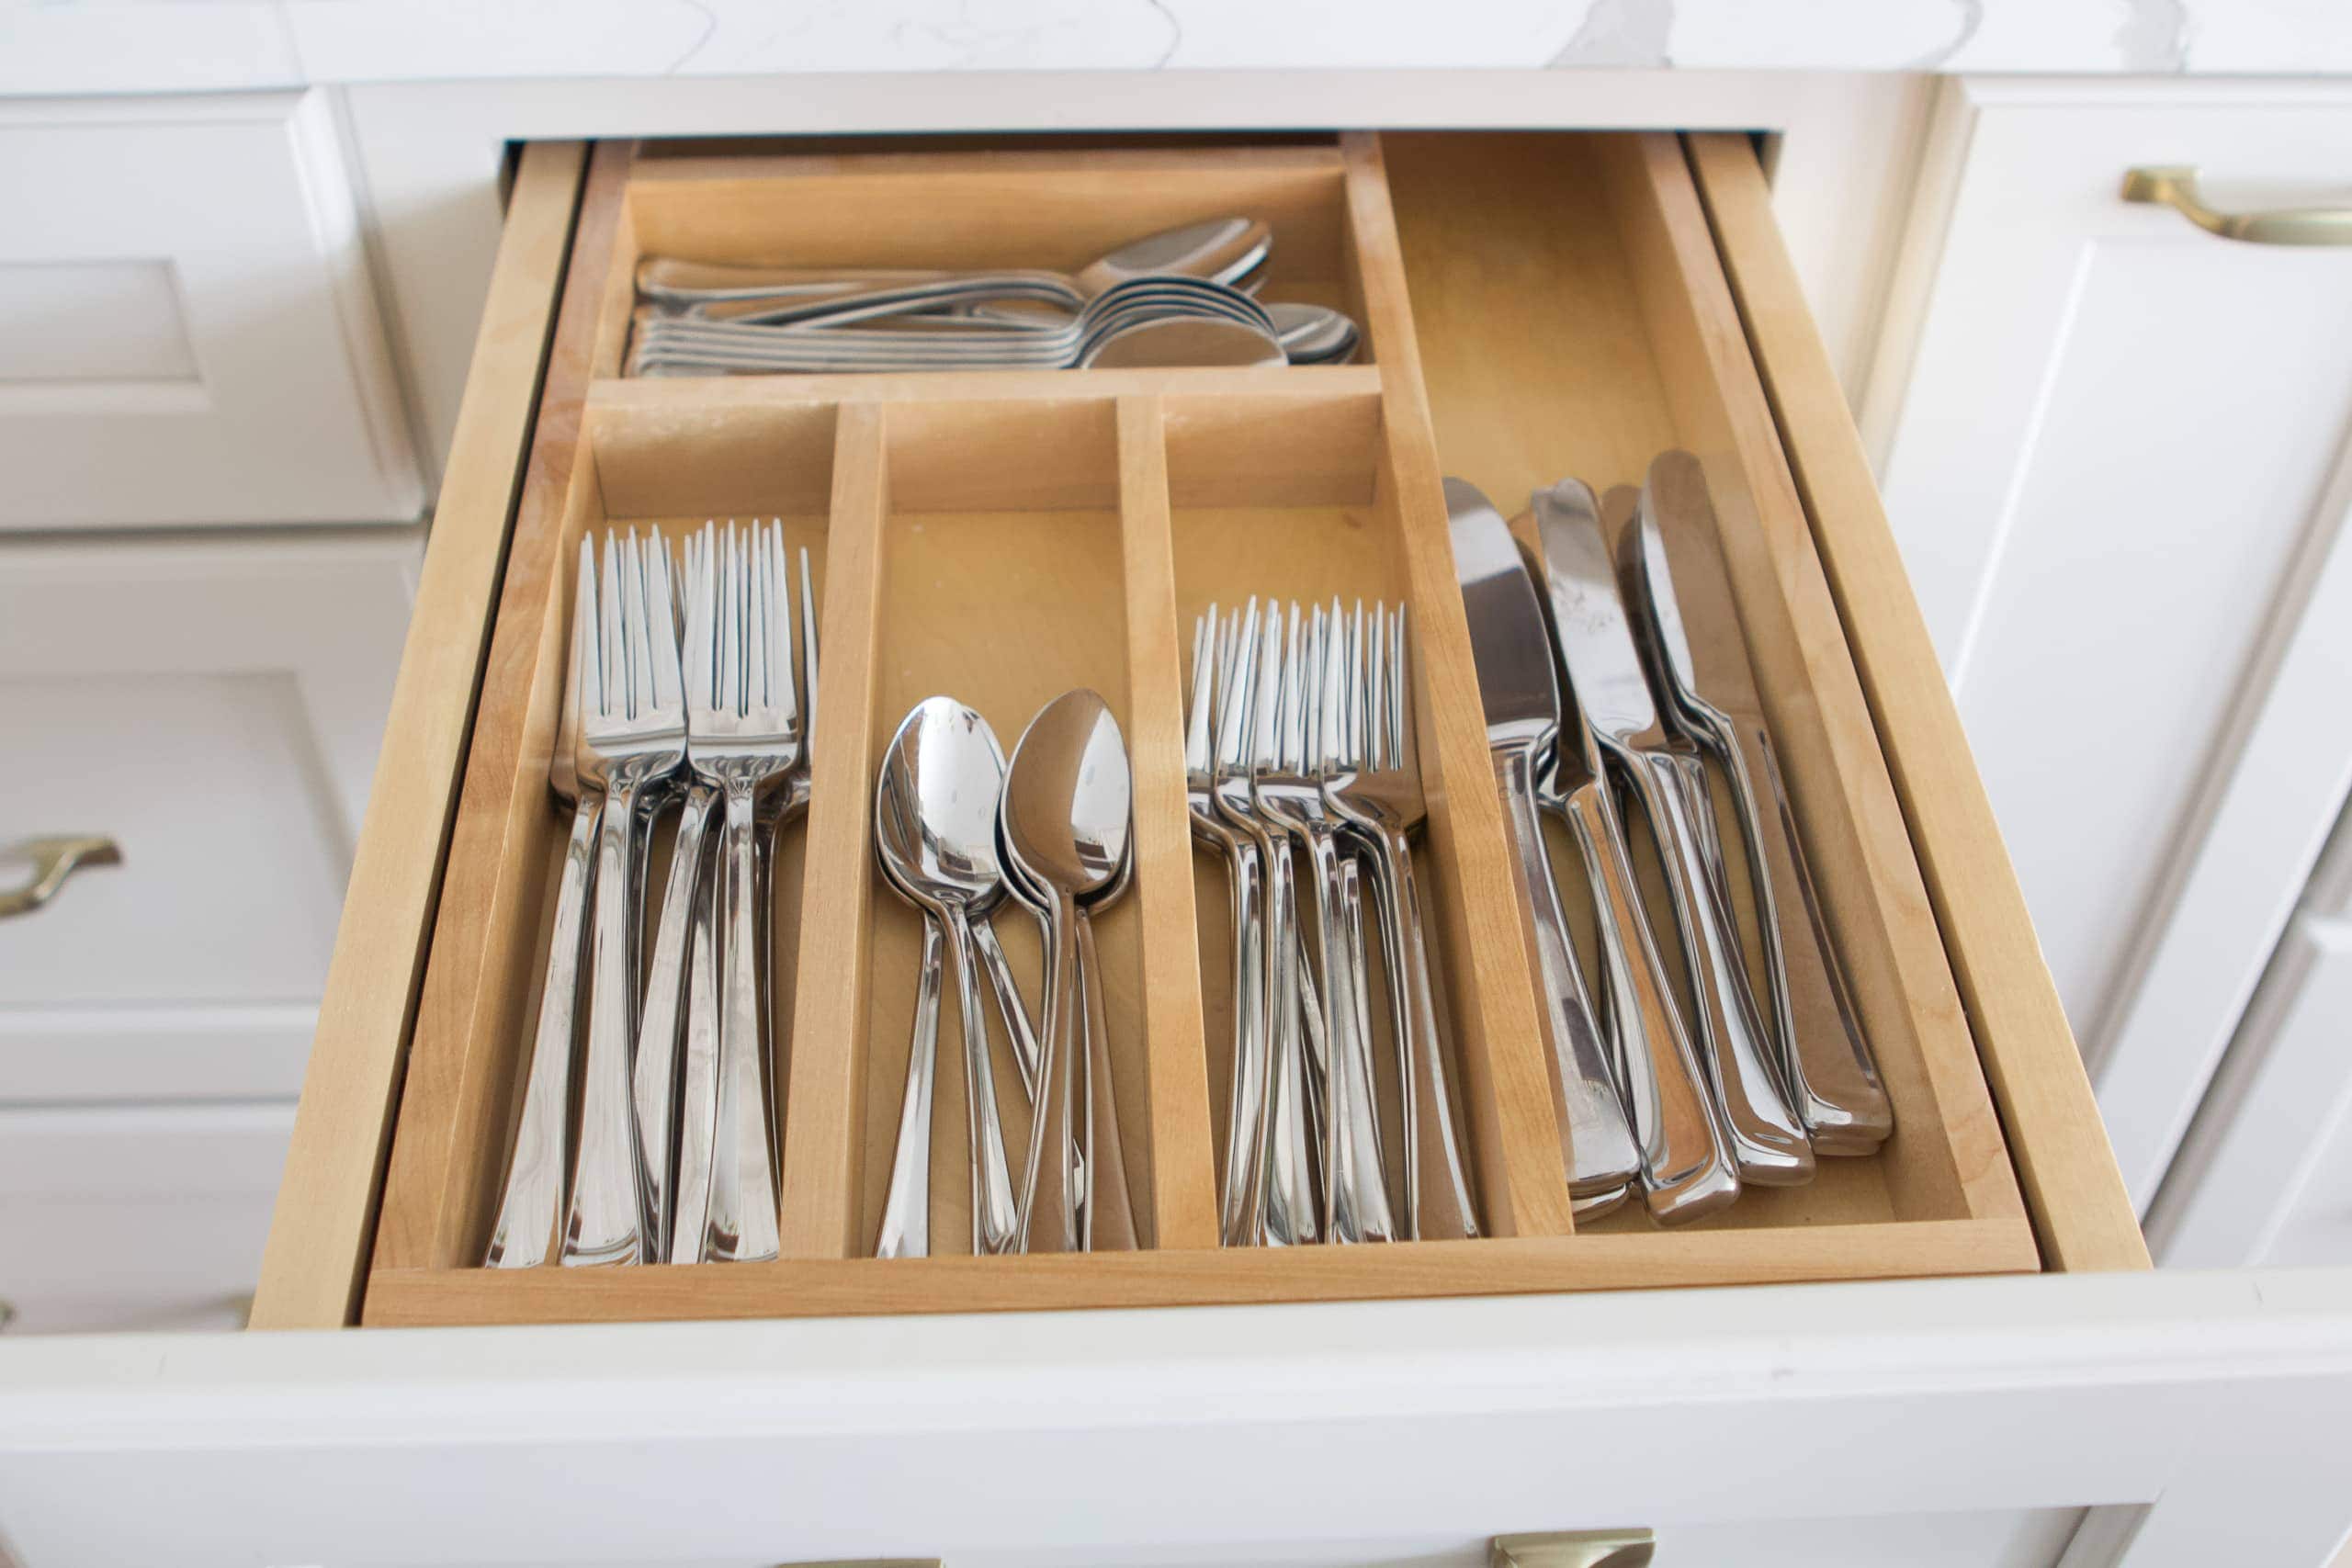 Two-tier silverware drawer